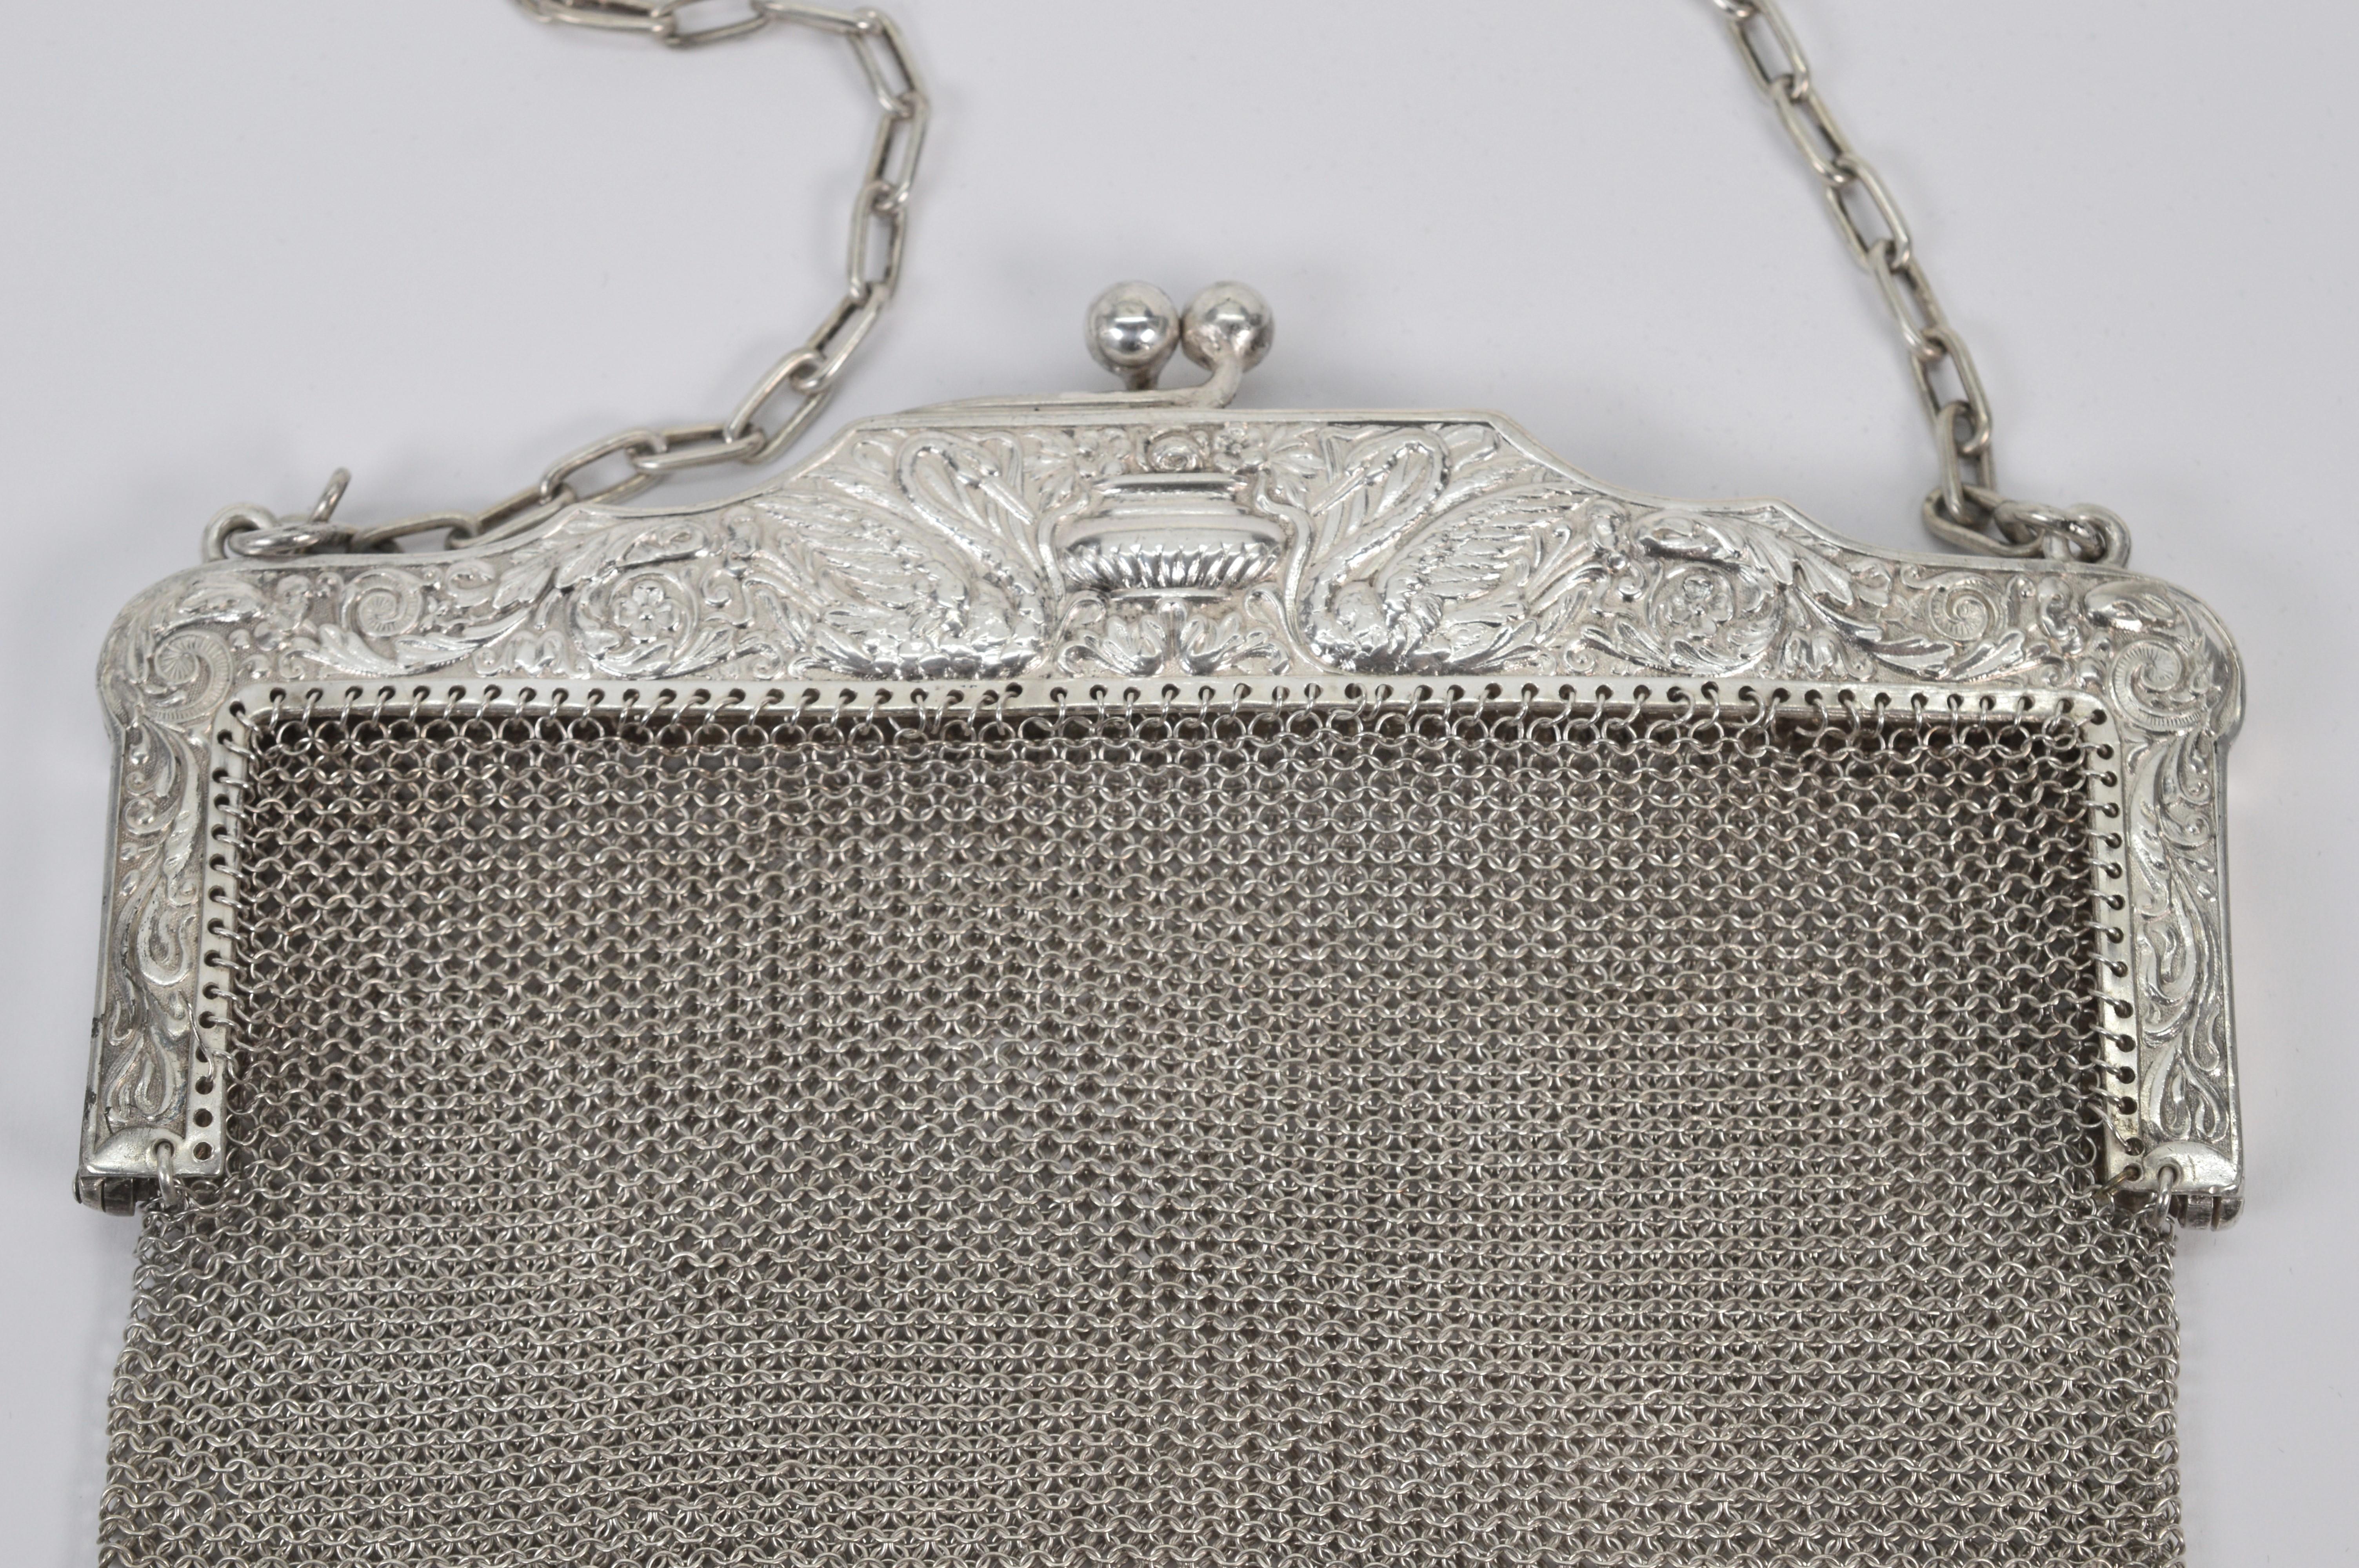 Vintage American Art Nouveau Silver Mesh Purse In Good Condition For Sale In Mount Kisco, NY